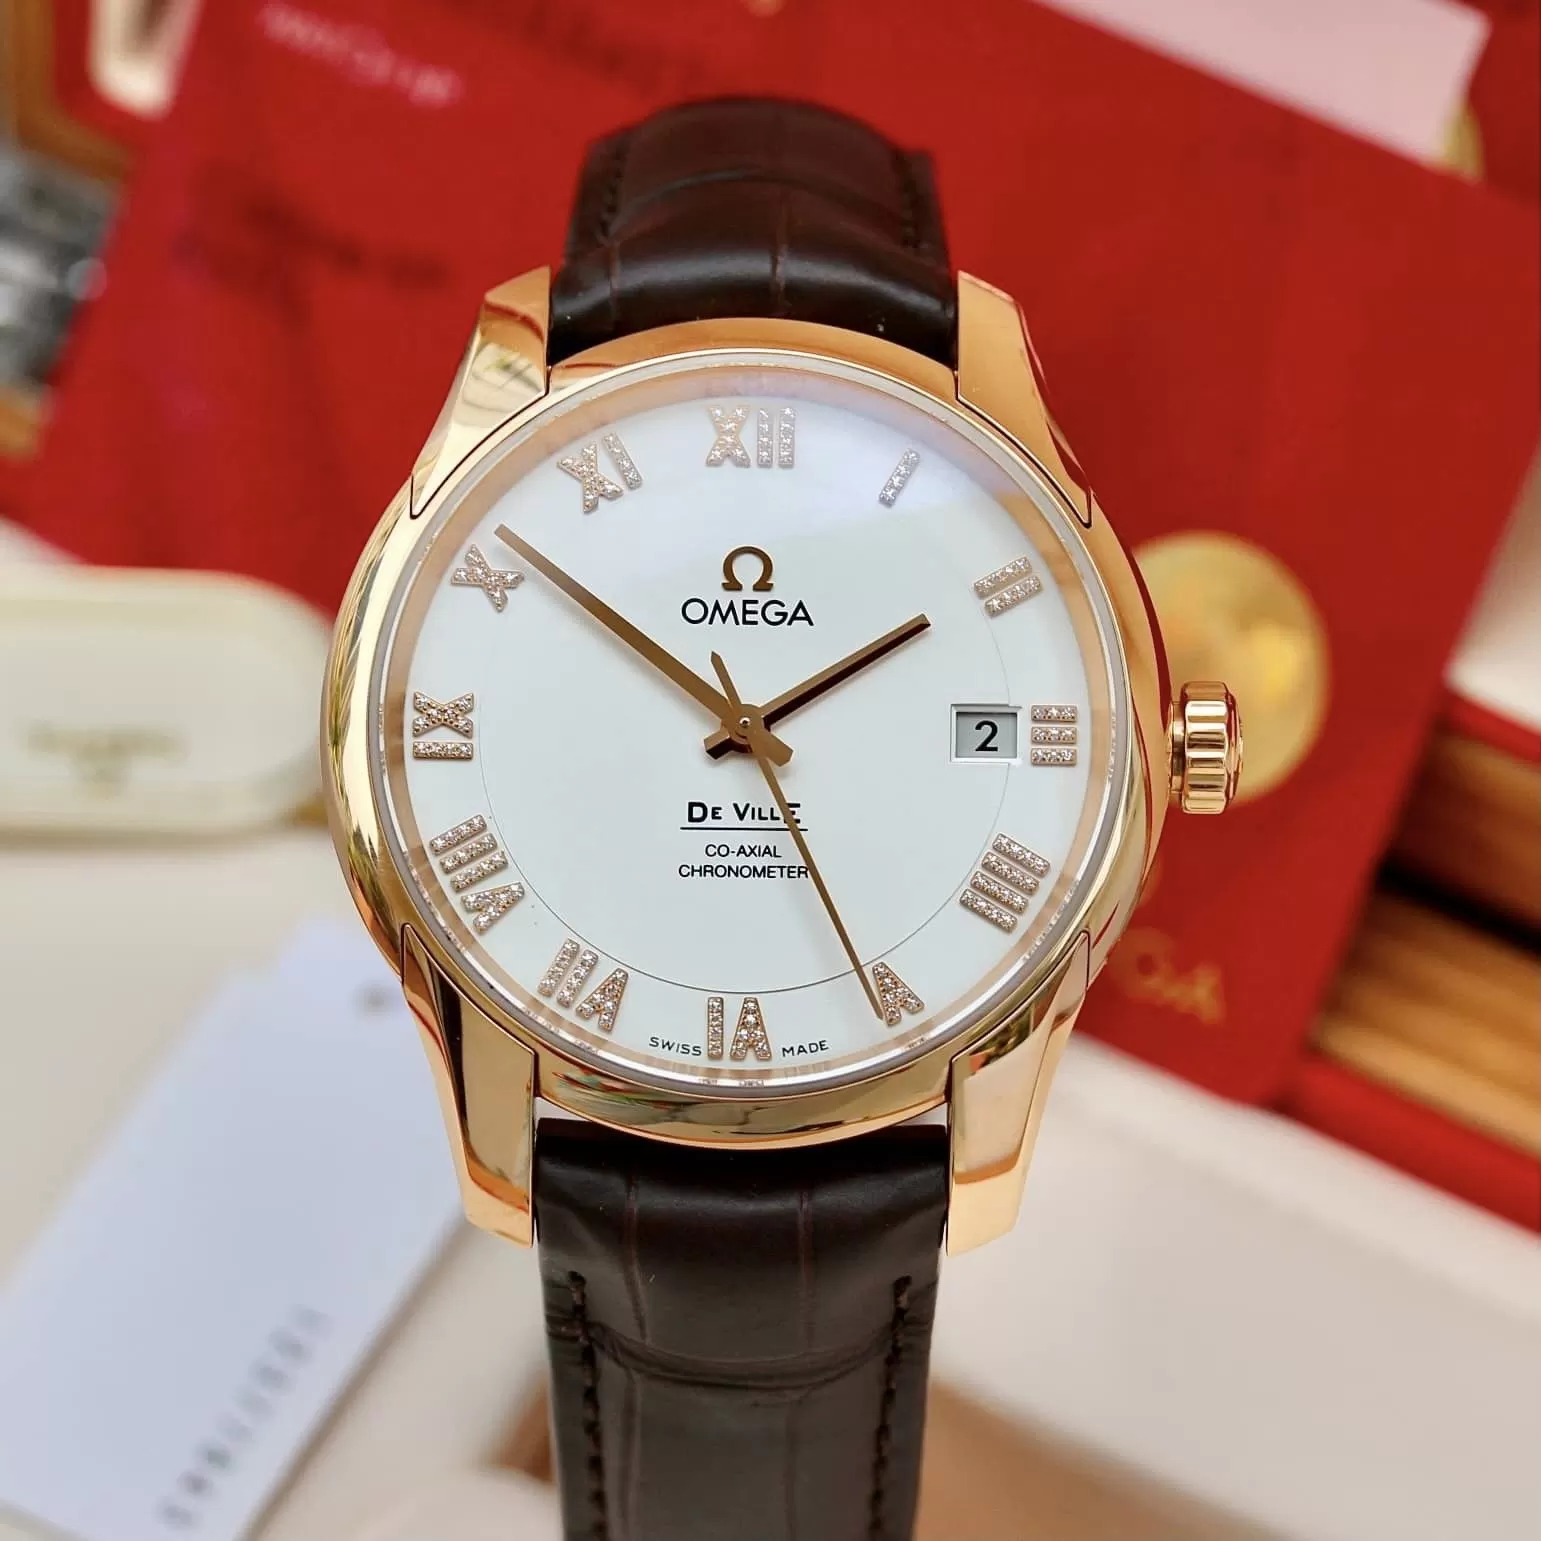 Đồng Hồ Omega DeVille Co-Axial 431.53.41.21.52.001 43153412152001